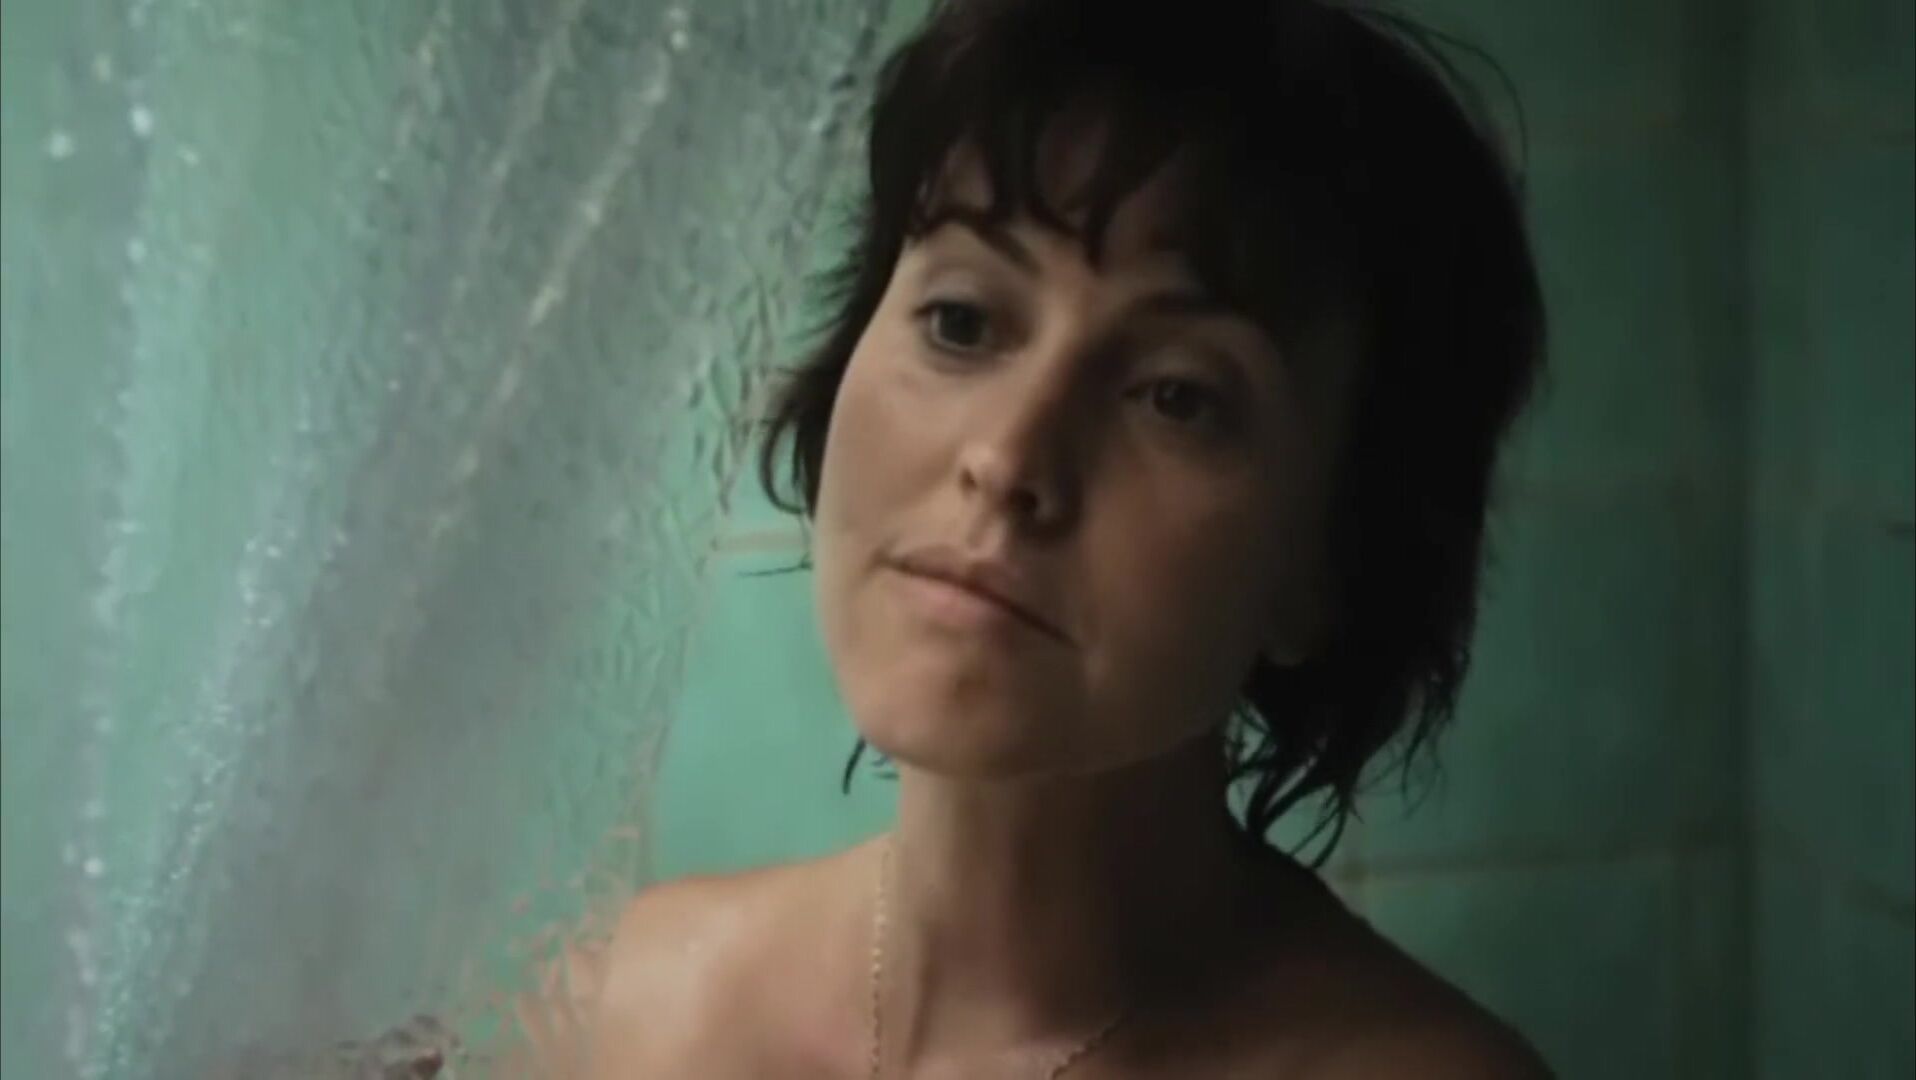 i-Sux Middle-aged actress Marie Louise Wille has sex with boy in Danish drama movie Dreng (2011) Footworship